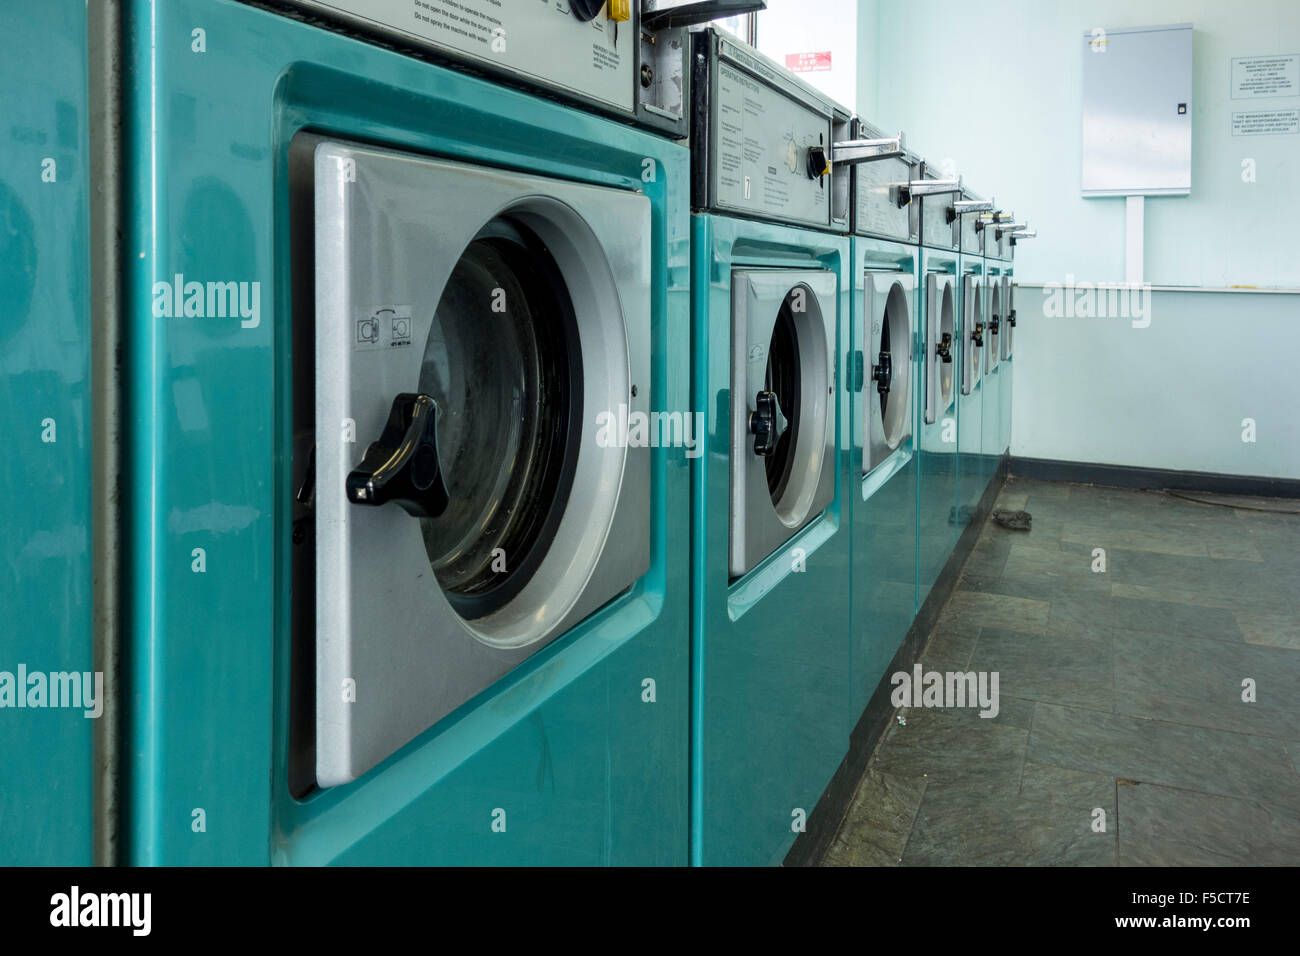 washing machines in a laundrette, UK Stock Photo